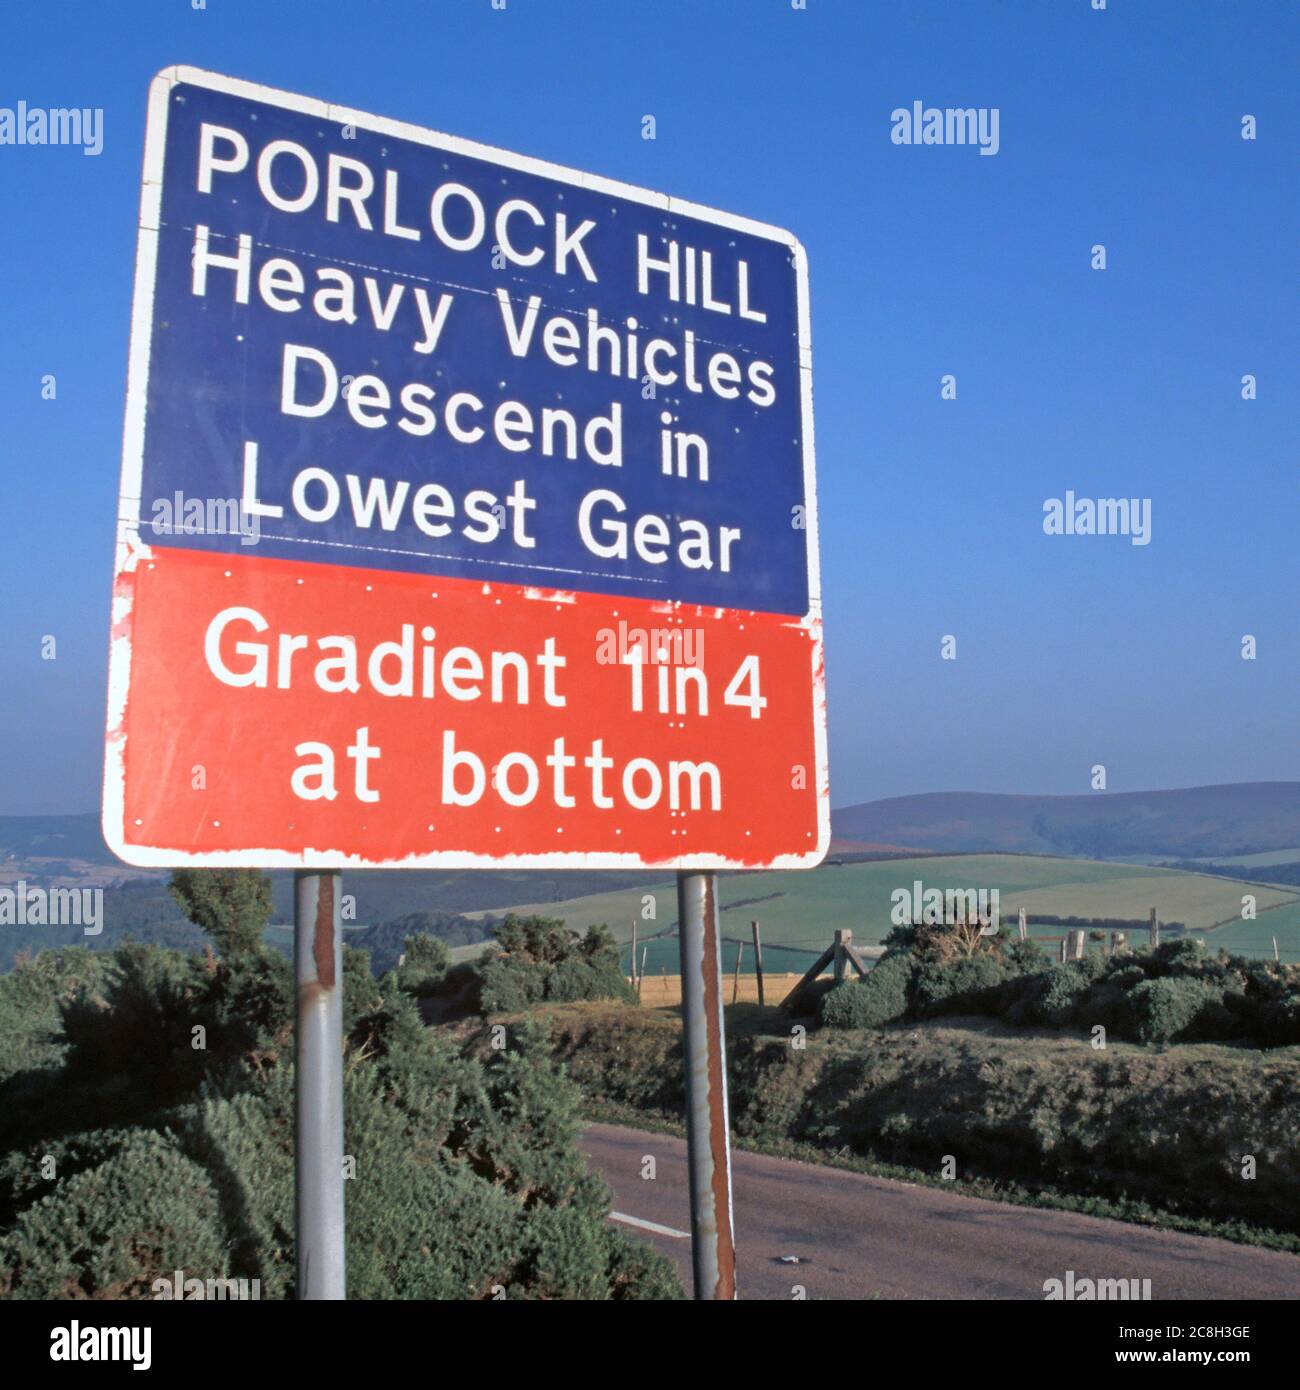 Road traffic warning sign at Porlock Hill on A39 steep gradient instructing use of low gear hilly farmland countryside landscape Somerset England UK Stock Photo